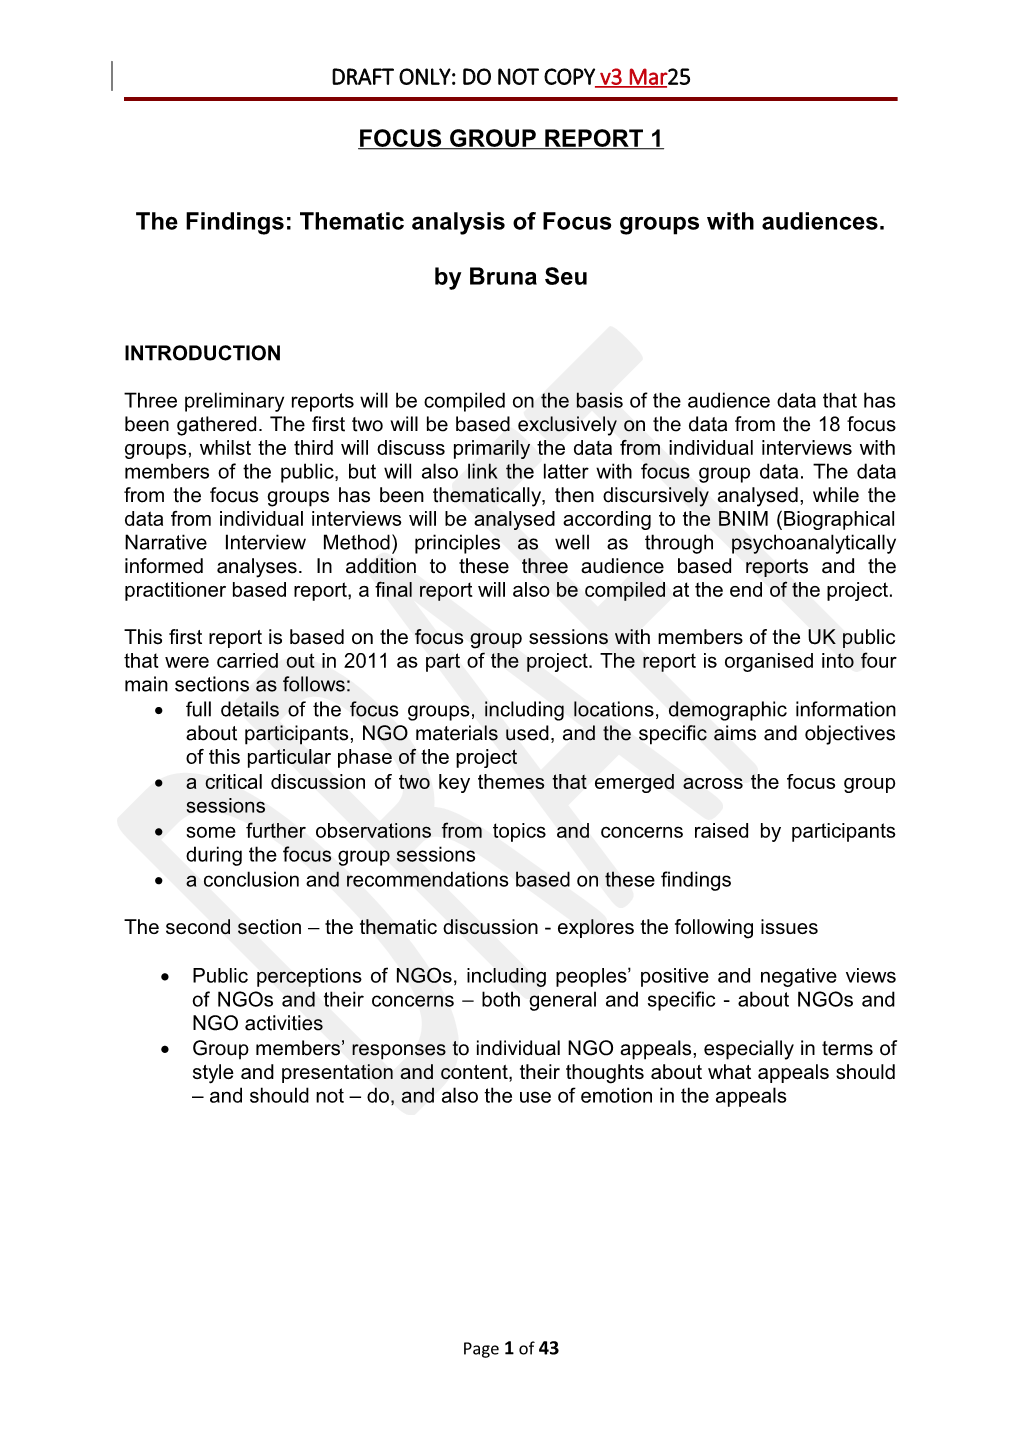 The Findings: Thematic Analysis of Focus Groups with Audiences